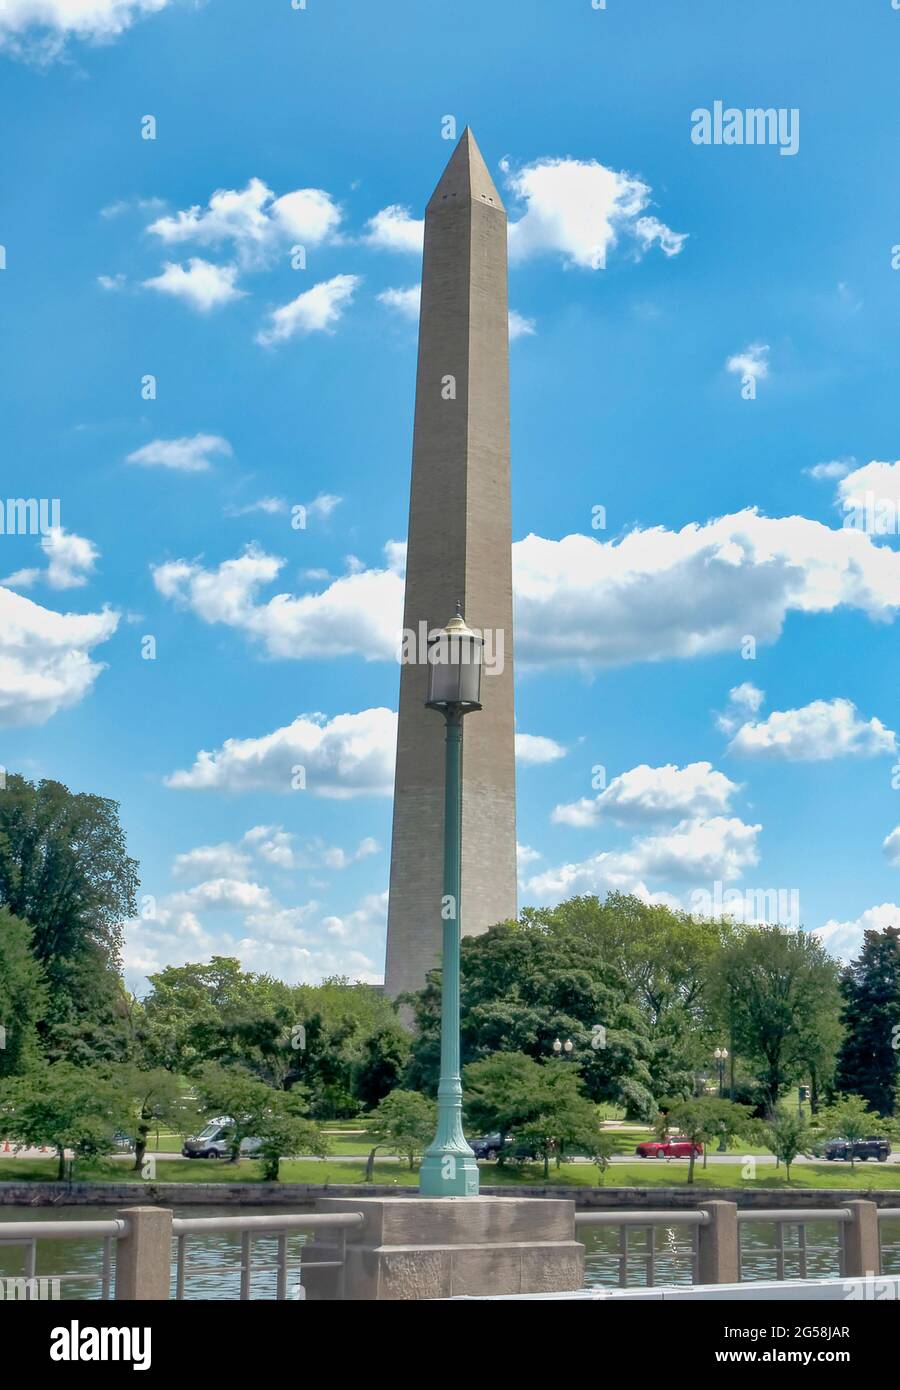 Old style street light in front of the Washington Monument. Stock Photo